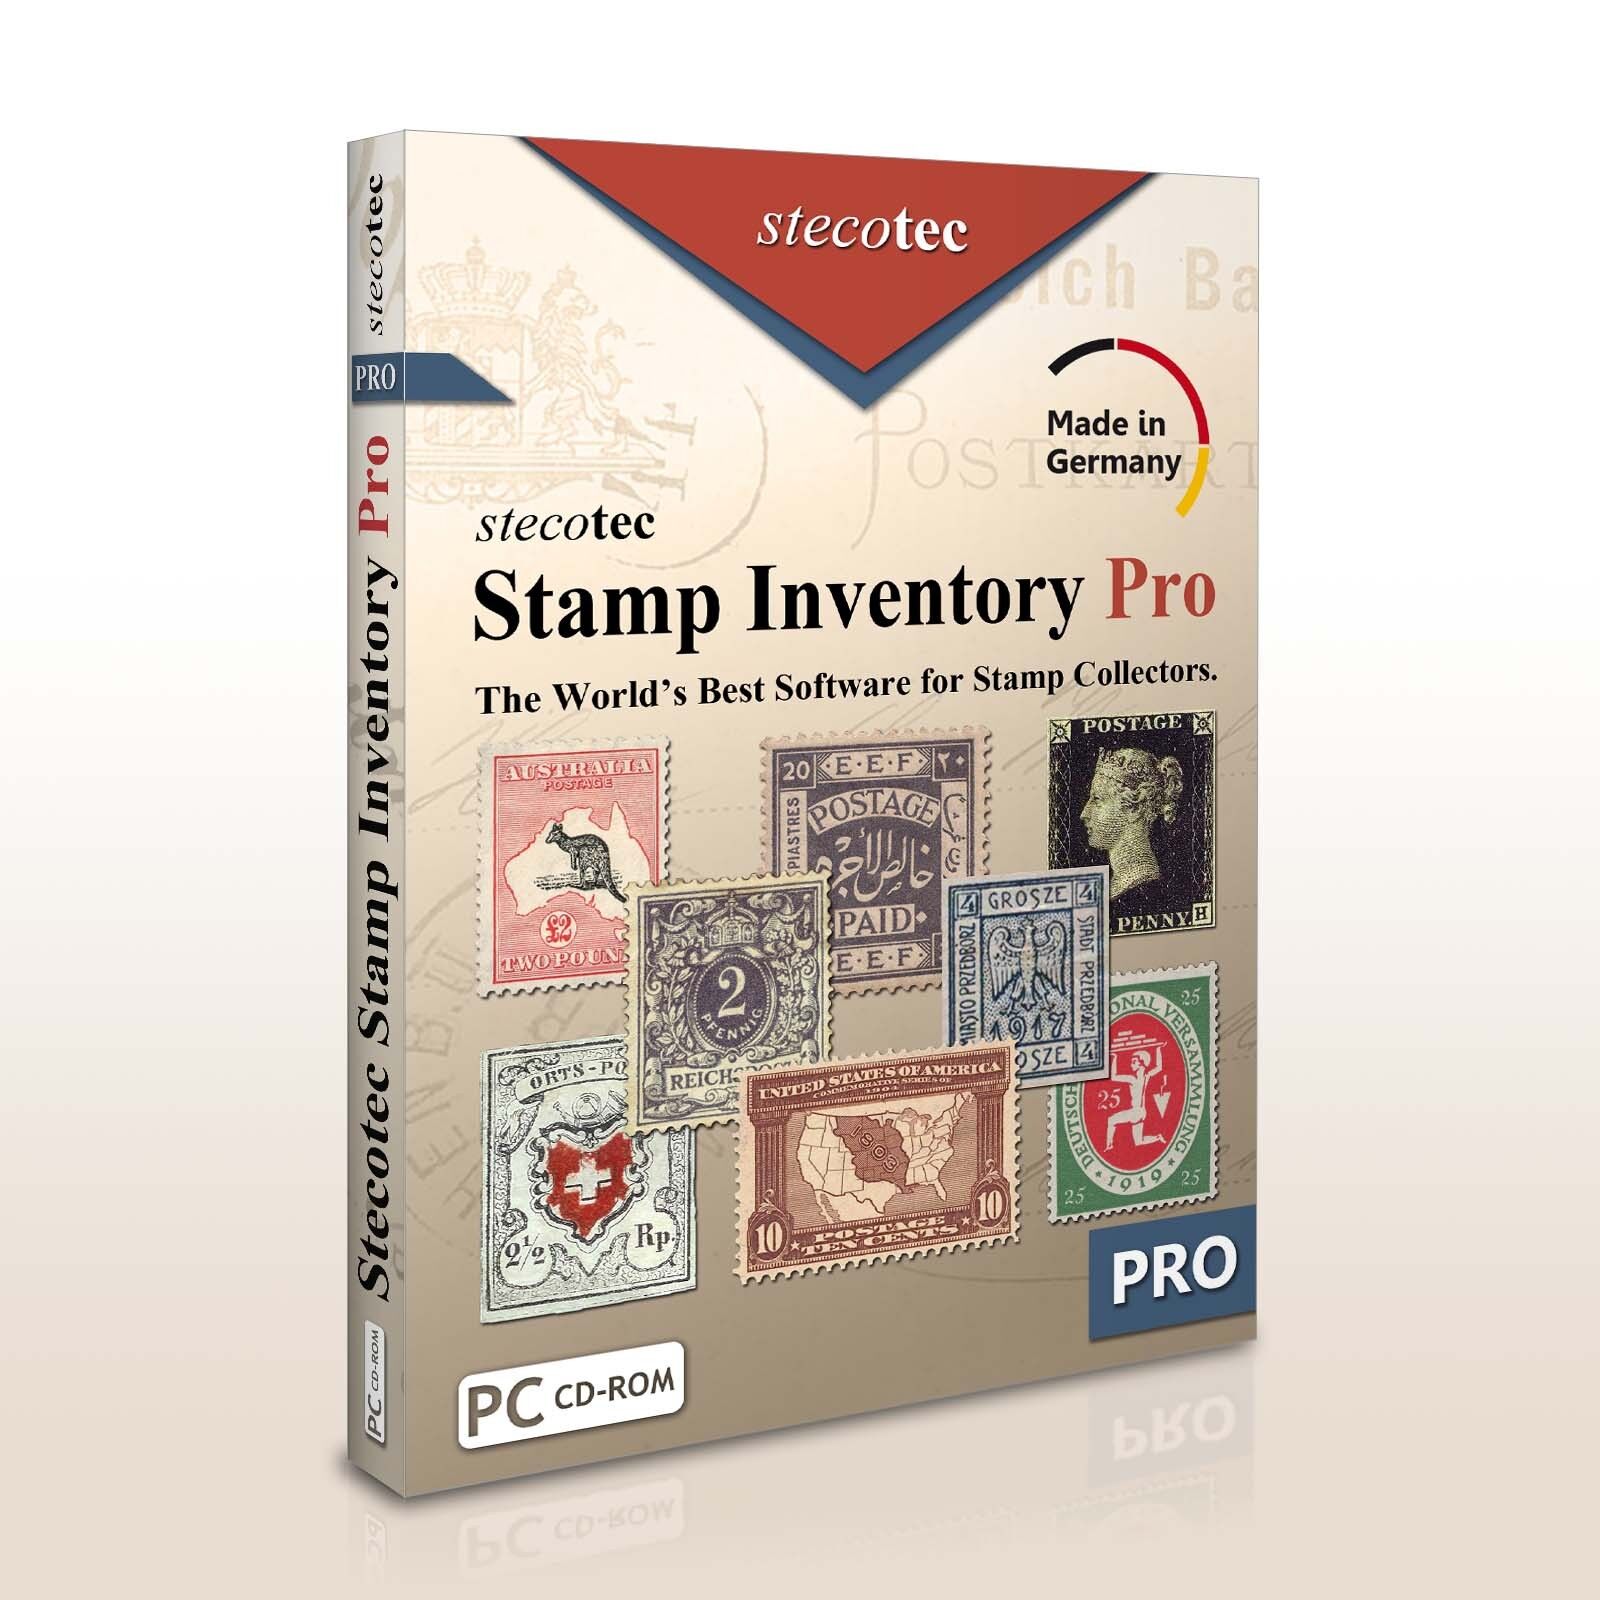 Stecotec Stamp Inventory Pro - The Collecting Software for Your Stamps - CD-ROM